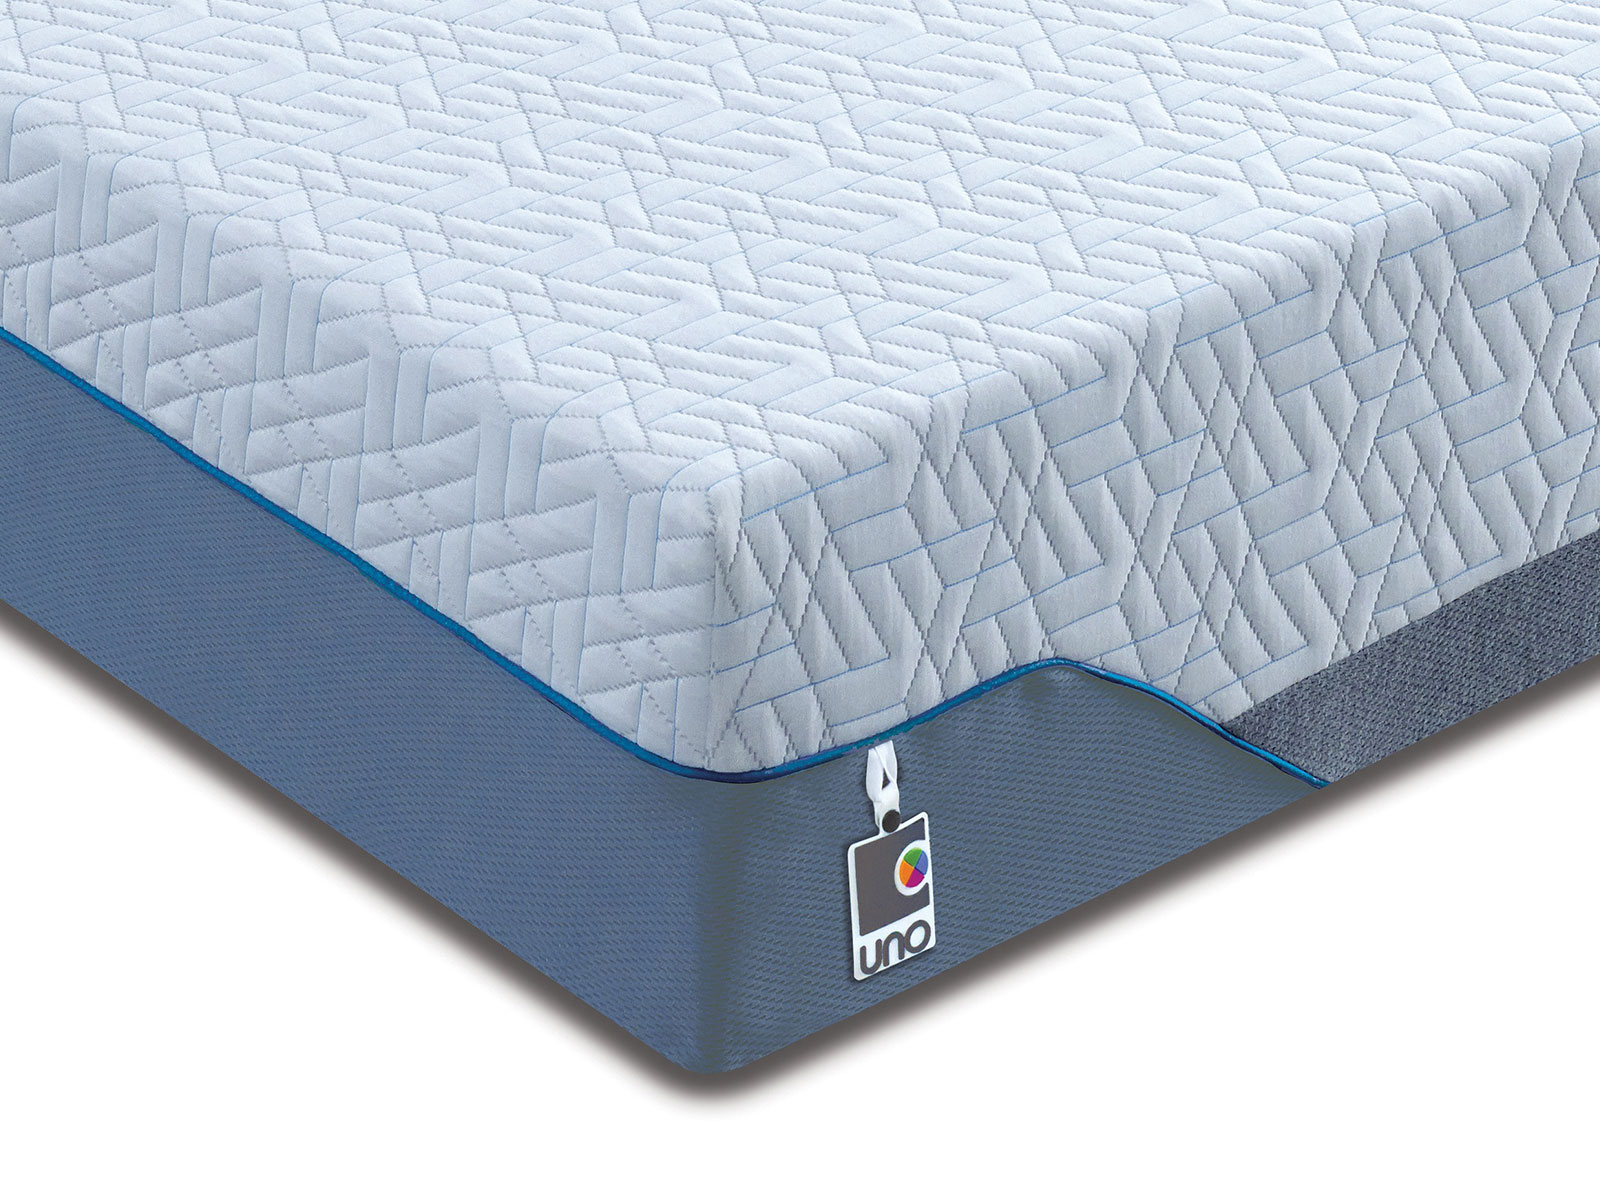 5ft King Size Breasley Uno Comfort Pocket Firm Mattress